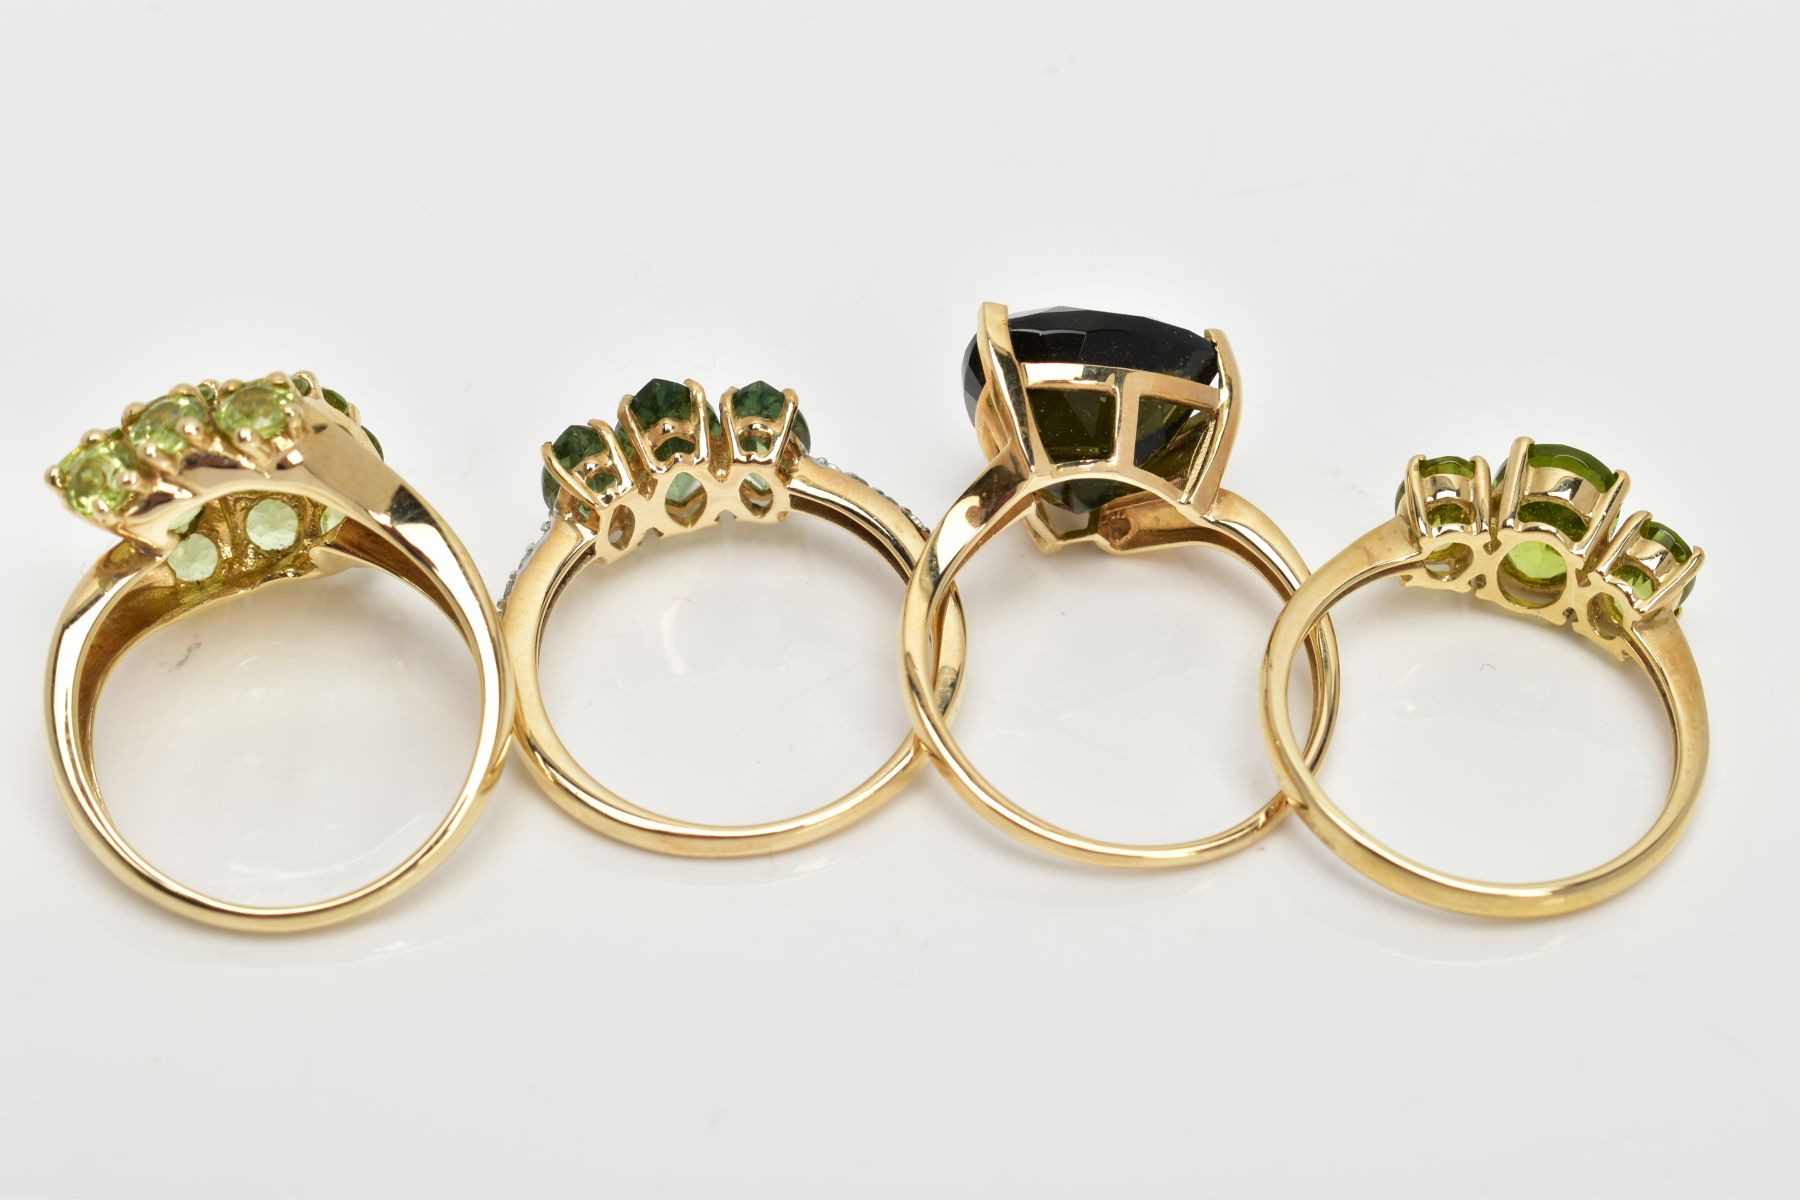 FOUR 9CT GOLD GEMSET RINGS, to include a three stone ring, oval cut peridot, prong set with - Image 3 of 3